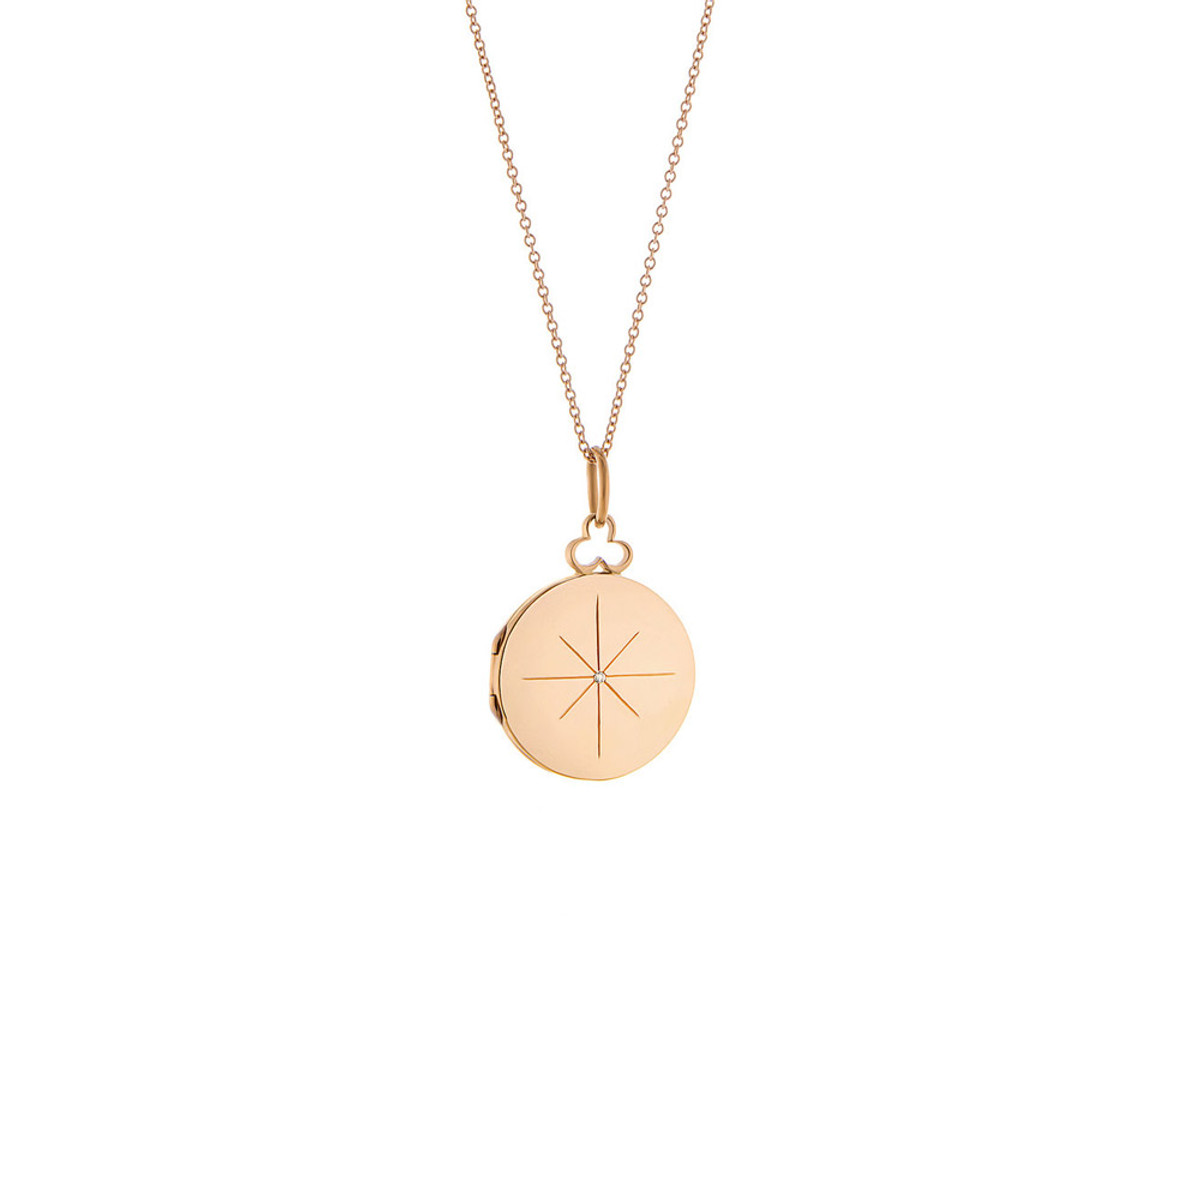 Hyde Park Collection North Star Short Chain Locket-27940 Product Image